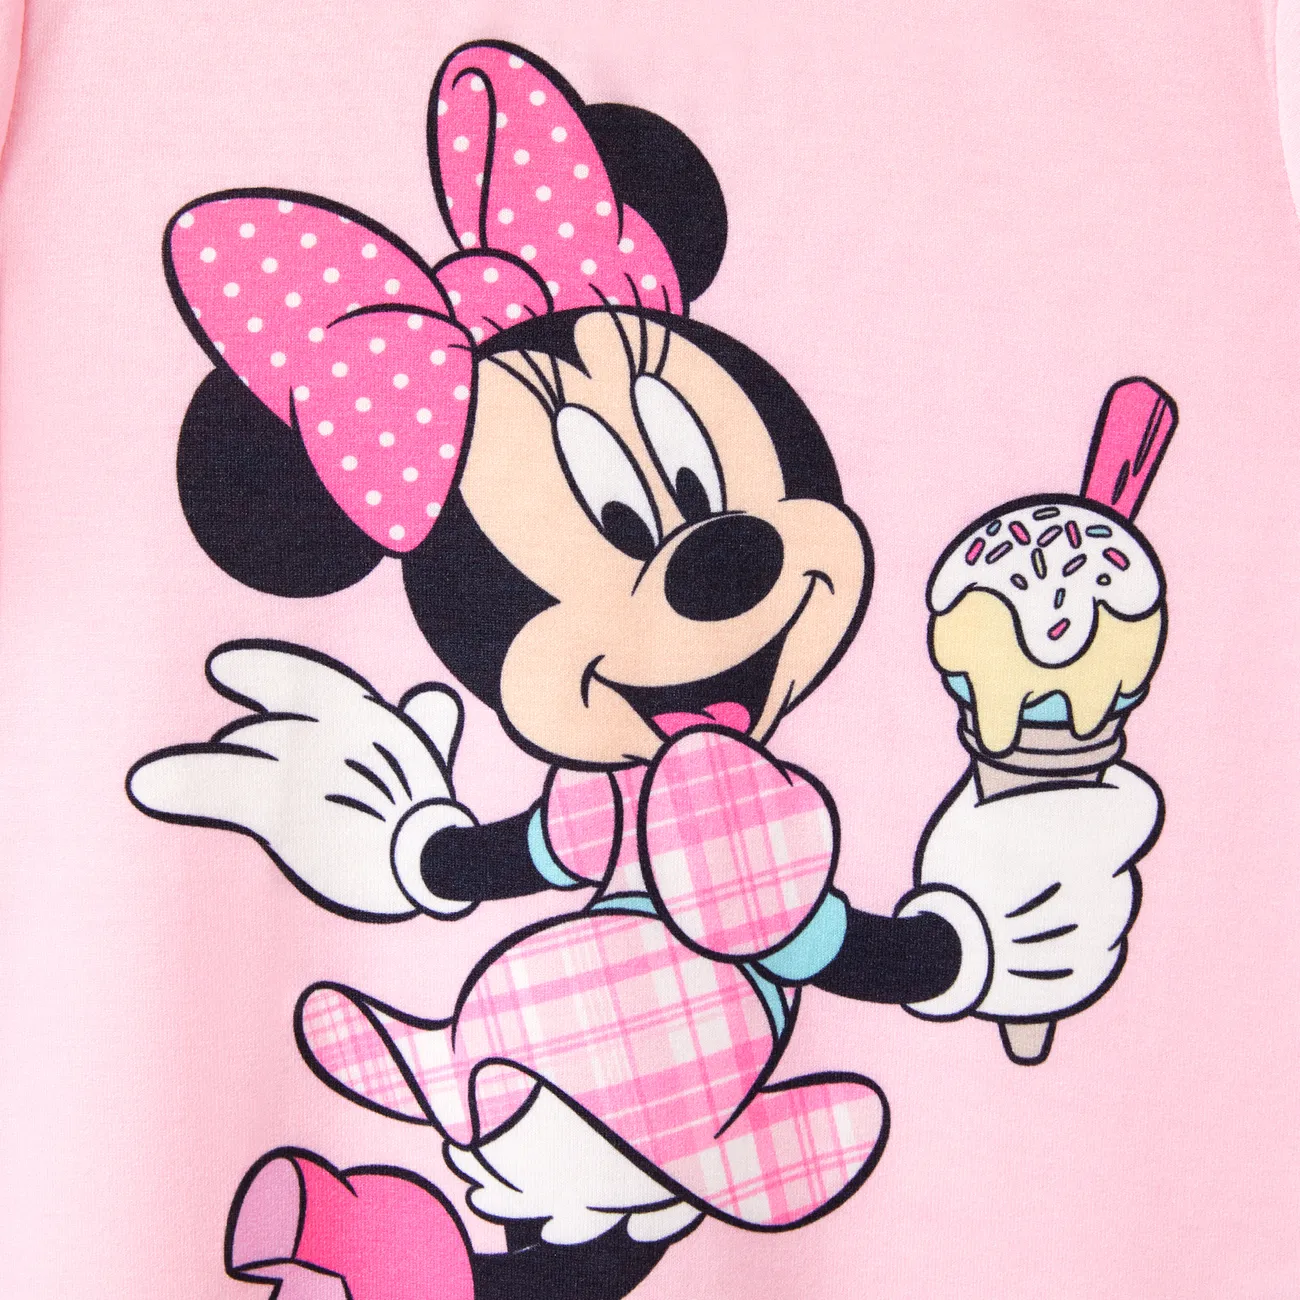 Disney Mickey and Friends Toddler/Kid Girl Naia™ Character Print Flutter-sleeve Tee Pink big image 1